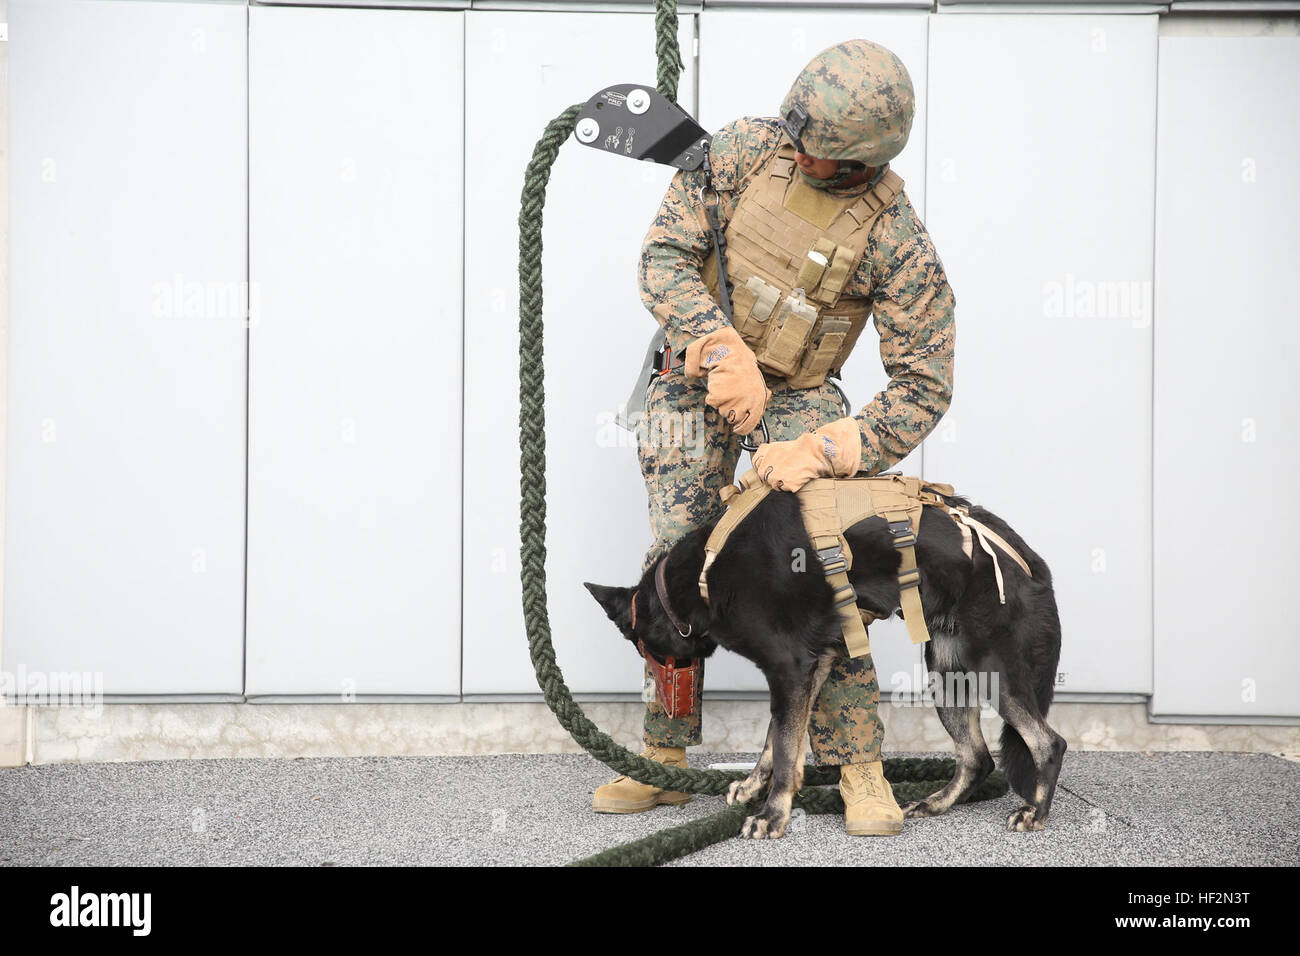 U.S. Marine Cpl. Jordan Kohan and his dog, Tessa, finish rappelling during helicopter rope suspension training aboard Camp Pendleton, Calif., Nov. 12, 2014. Kohan is a military working dog handler with Combat Logistics Battalion 15 and is part of the Maritime Raid Force Security Element for the 15th Marine Expeditionary Unit. (U.S. Marine Corps photo by Cpl. Anna Albrecht/Released) 15th MEU Marines conduct fast rope training 141112-M-SV584-067 Stock Photo